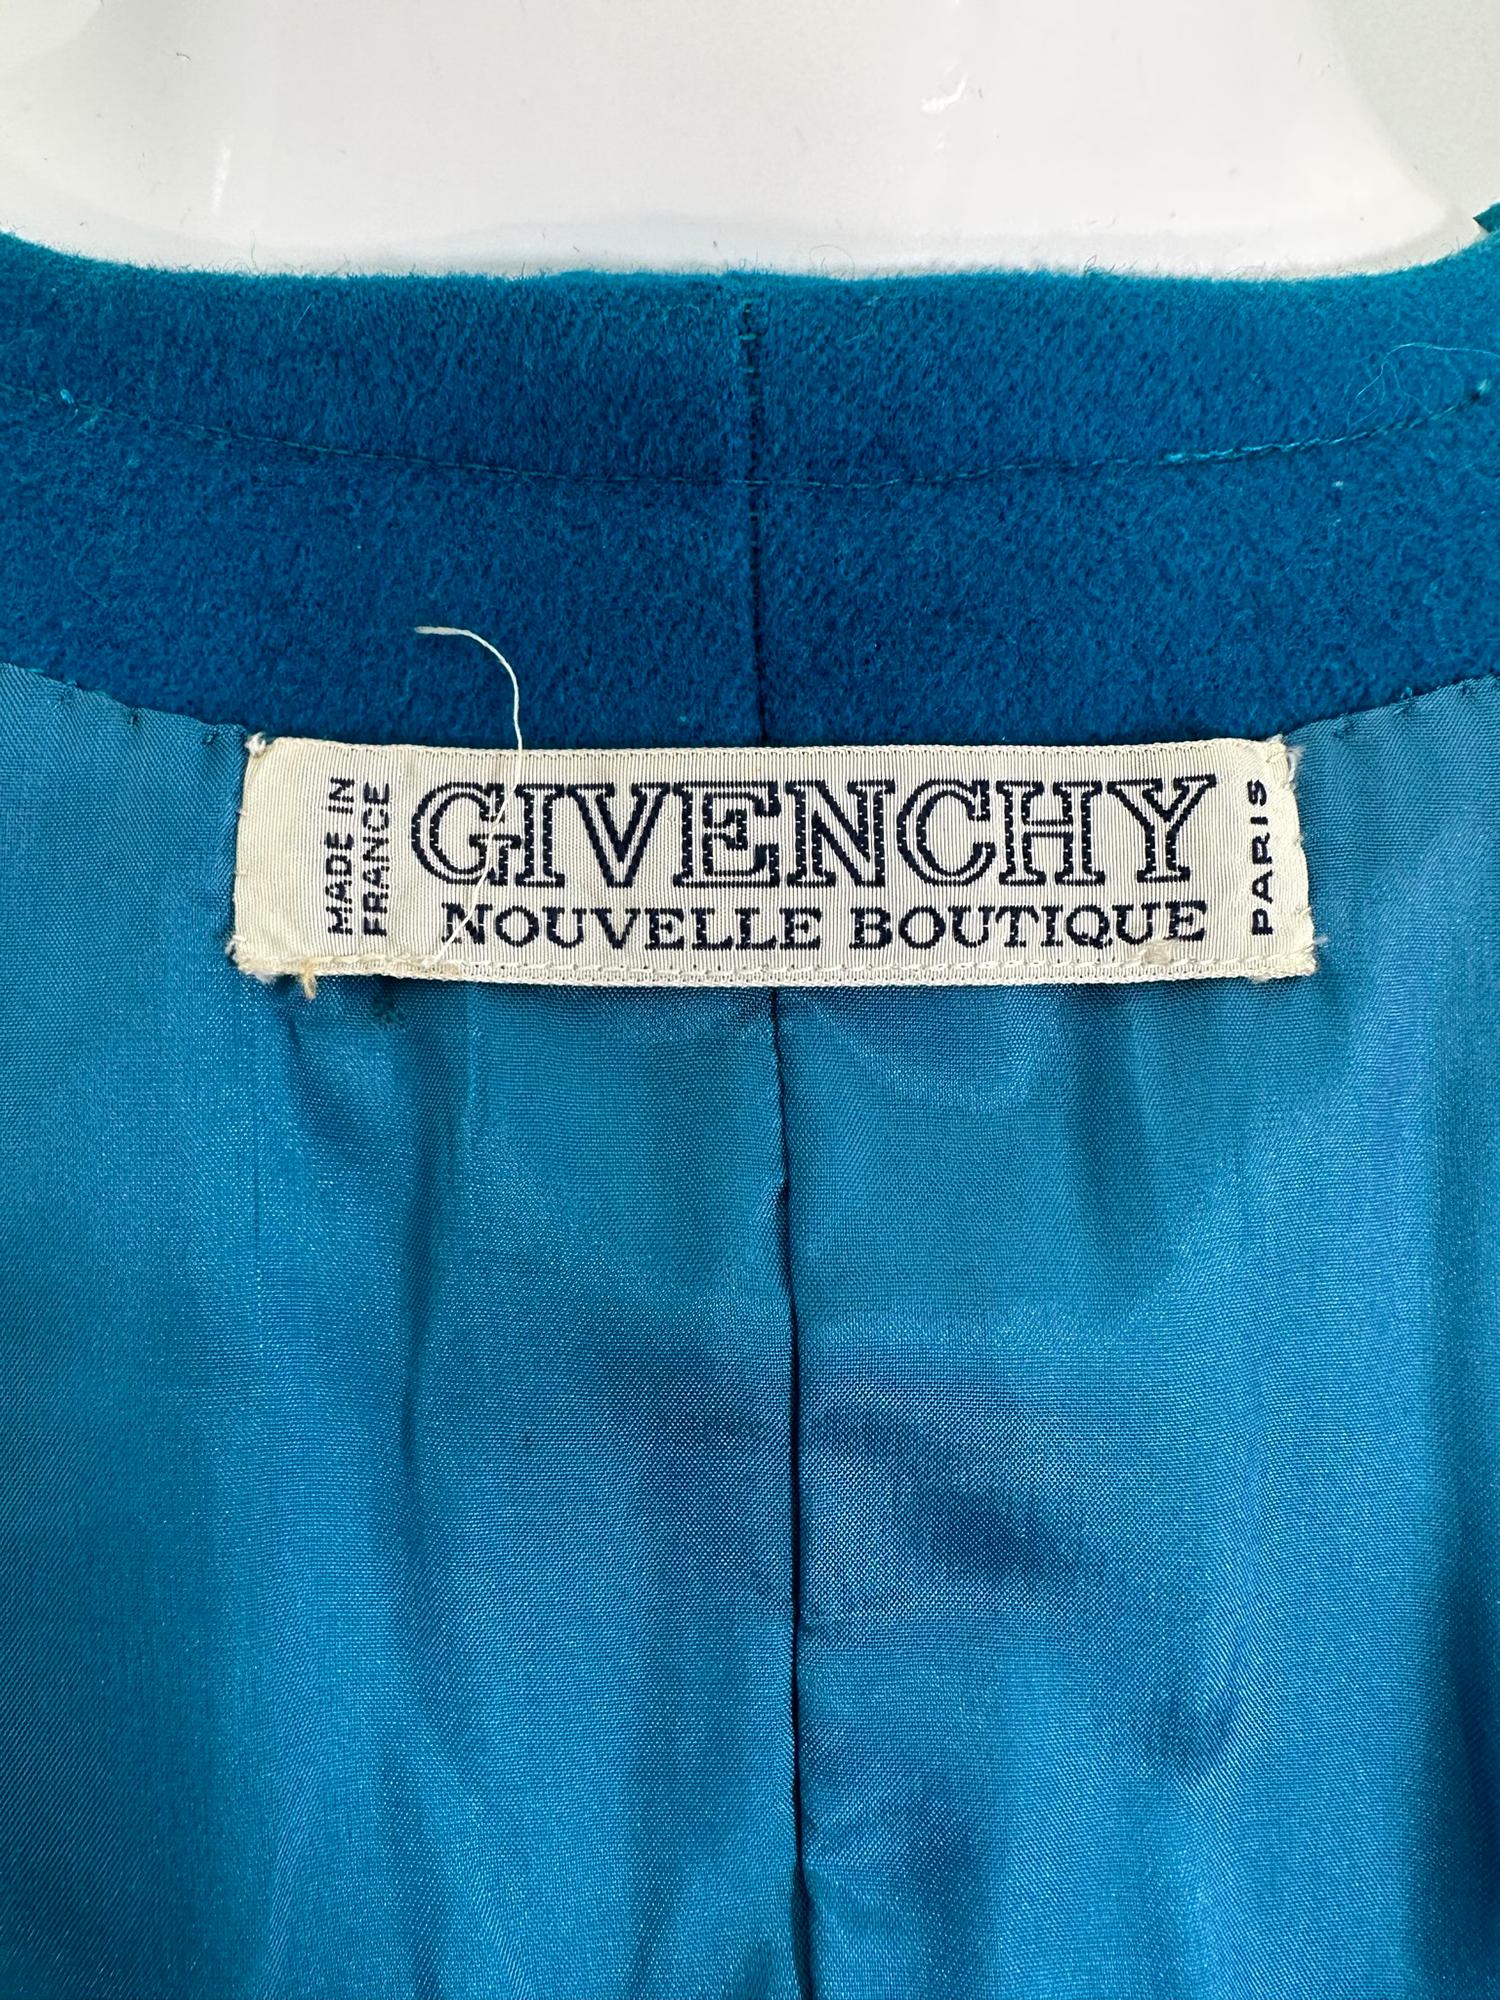 Givenchy Turquoise Wool Open Front Swing Coat with Angled Pockets 1980s For Sale 6